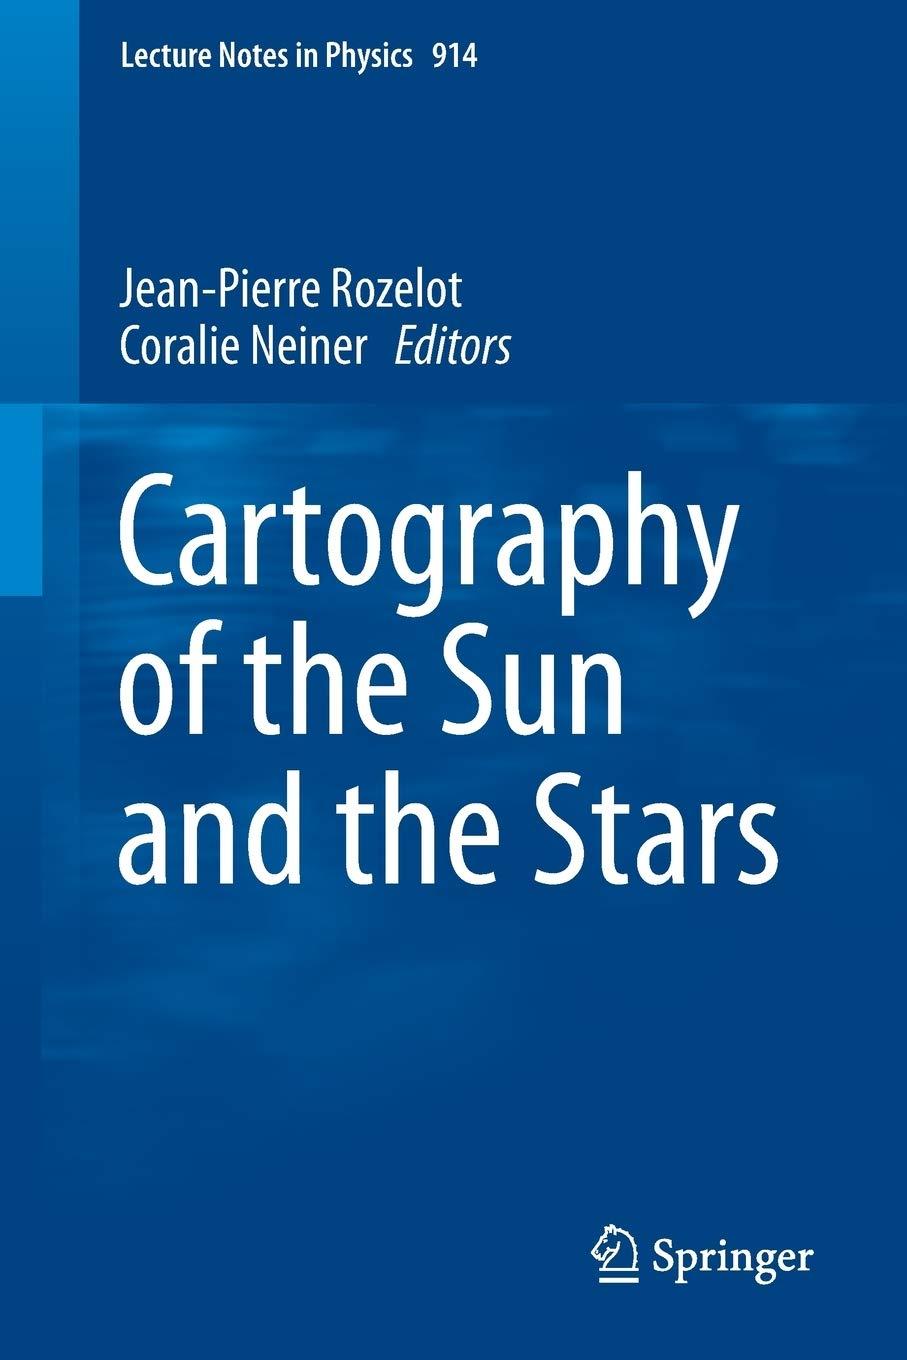 cartography of the sun and the stars 1st edition jean-pierre rozelot, coralie neiner 3319241494,